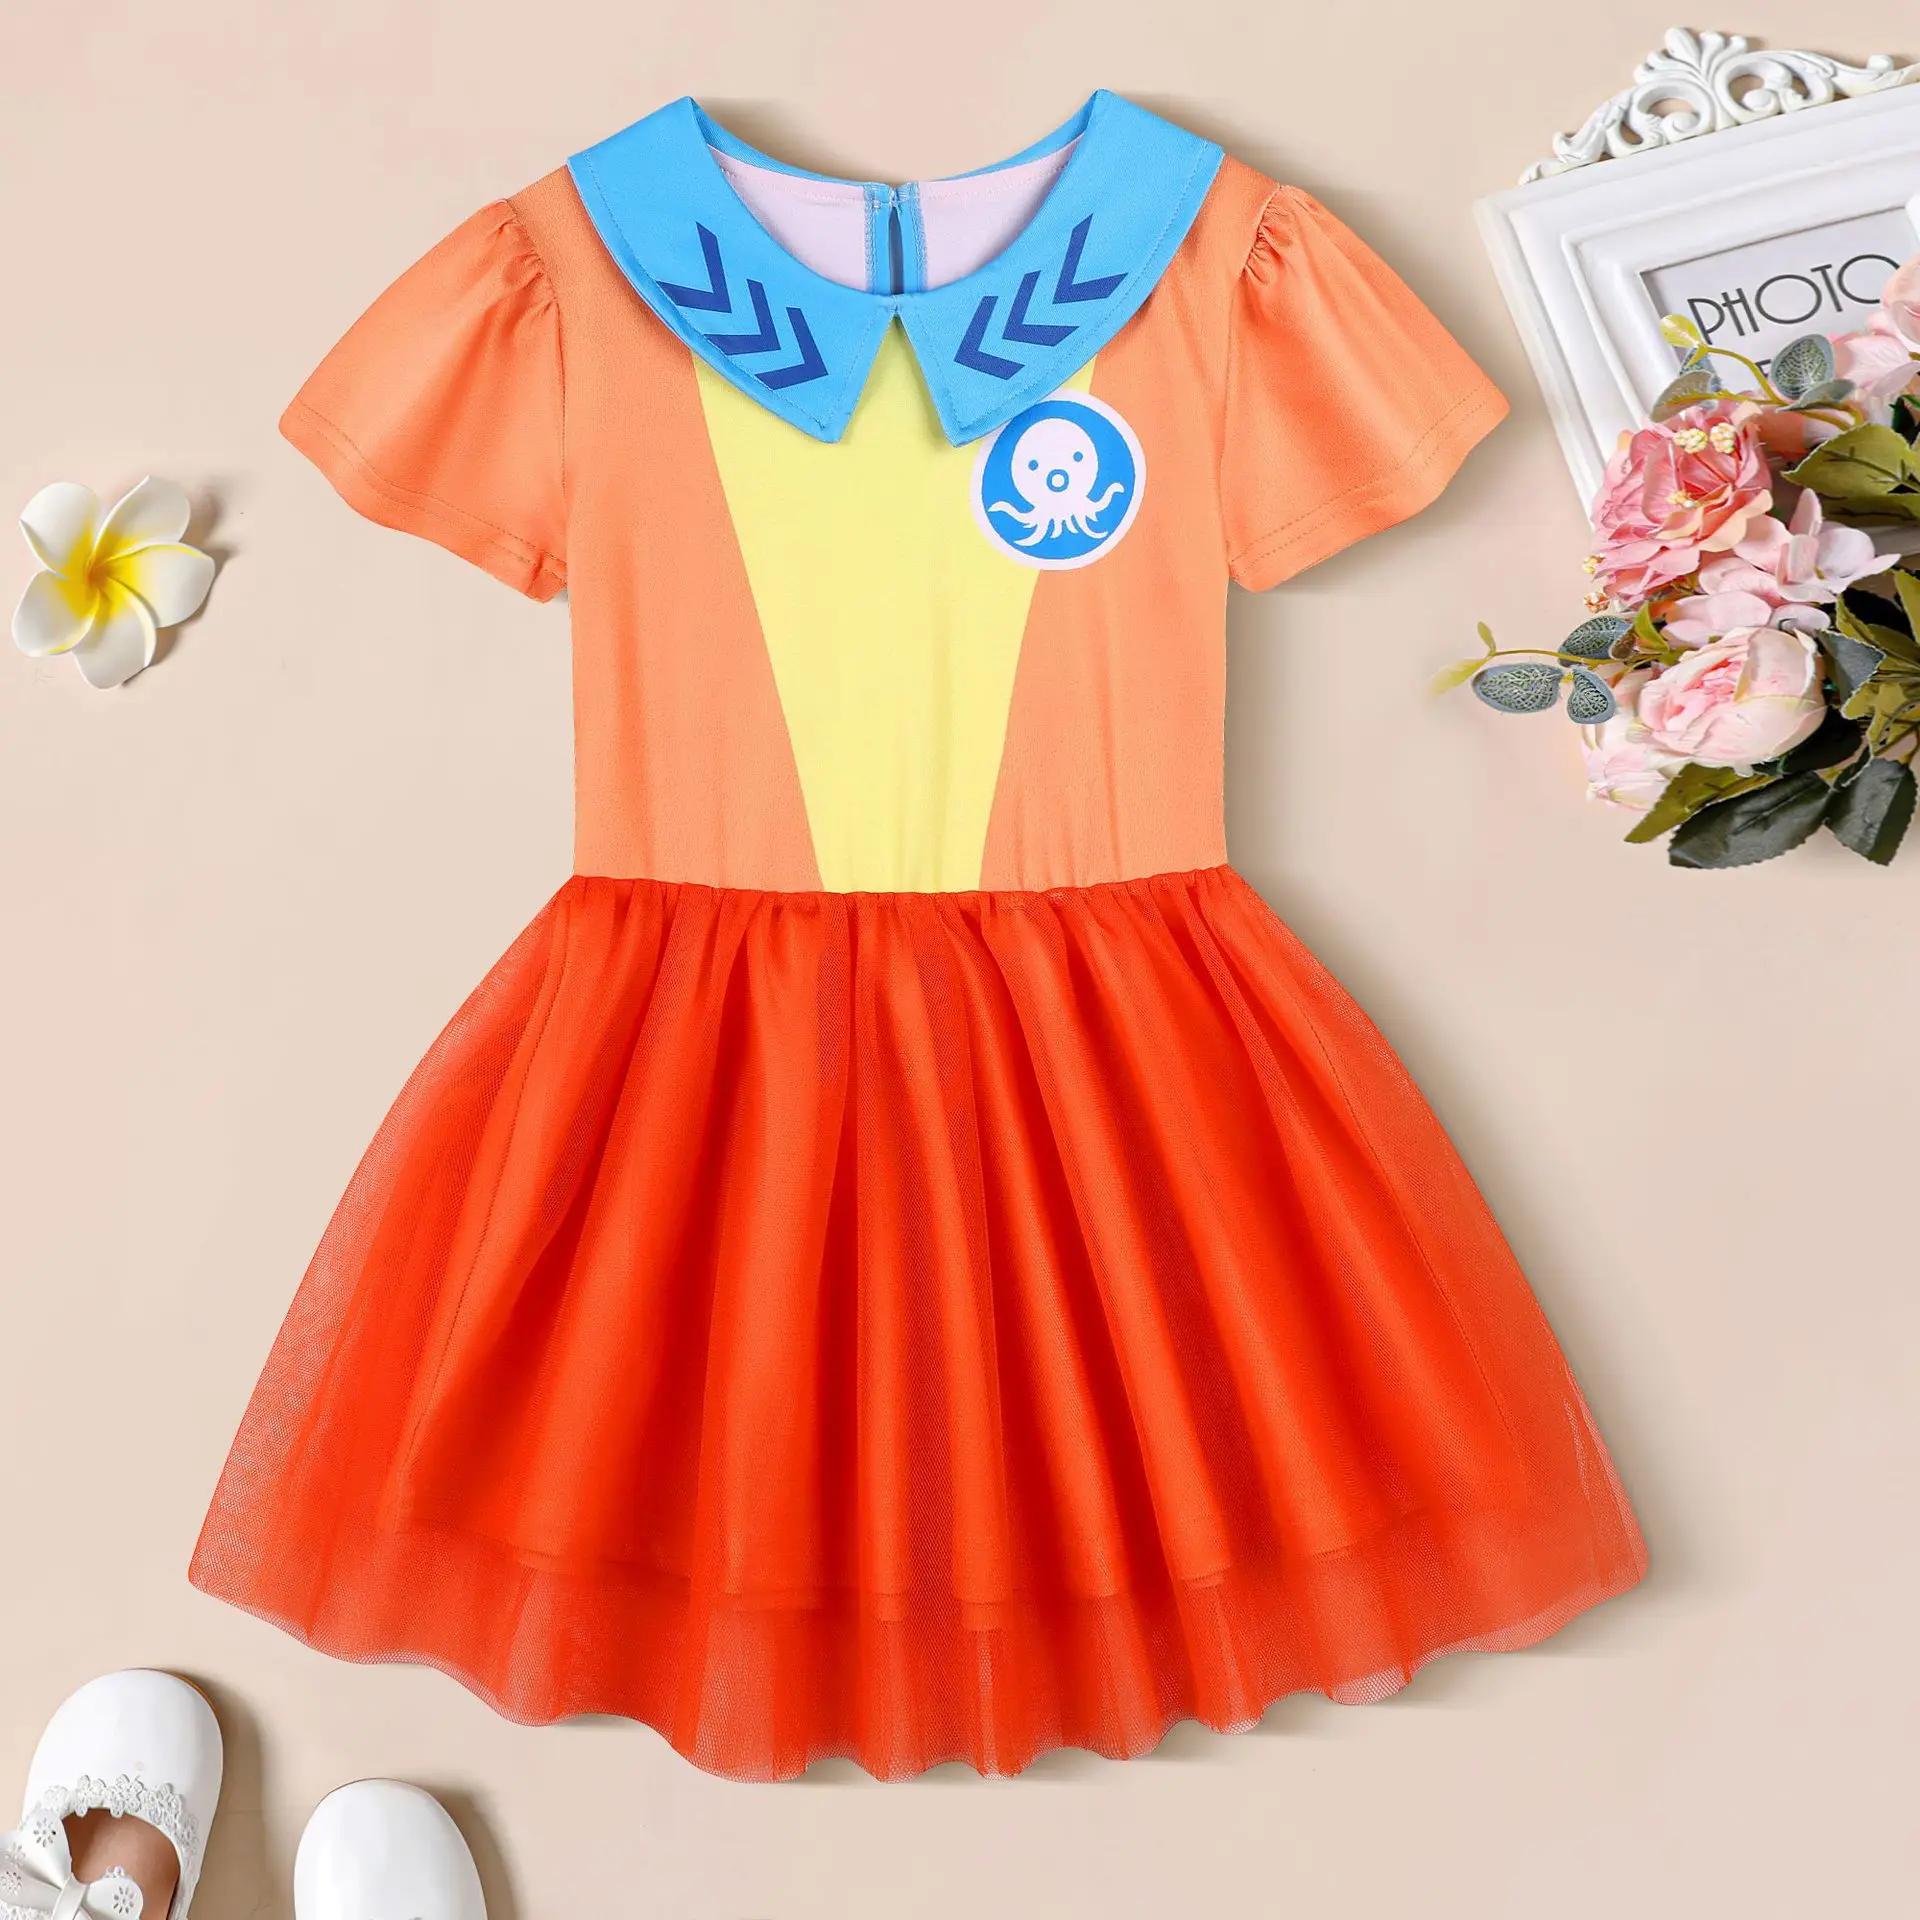 2022 Summer Clothes Girls The Octonauts Princess Dresses for Kids Birthday Outfits Baby Children Cute Daily Mesh Lace Vestido